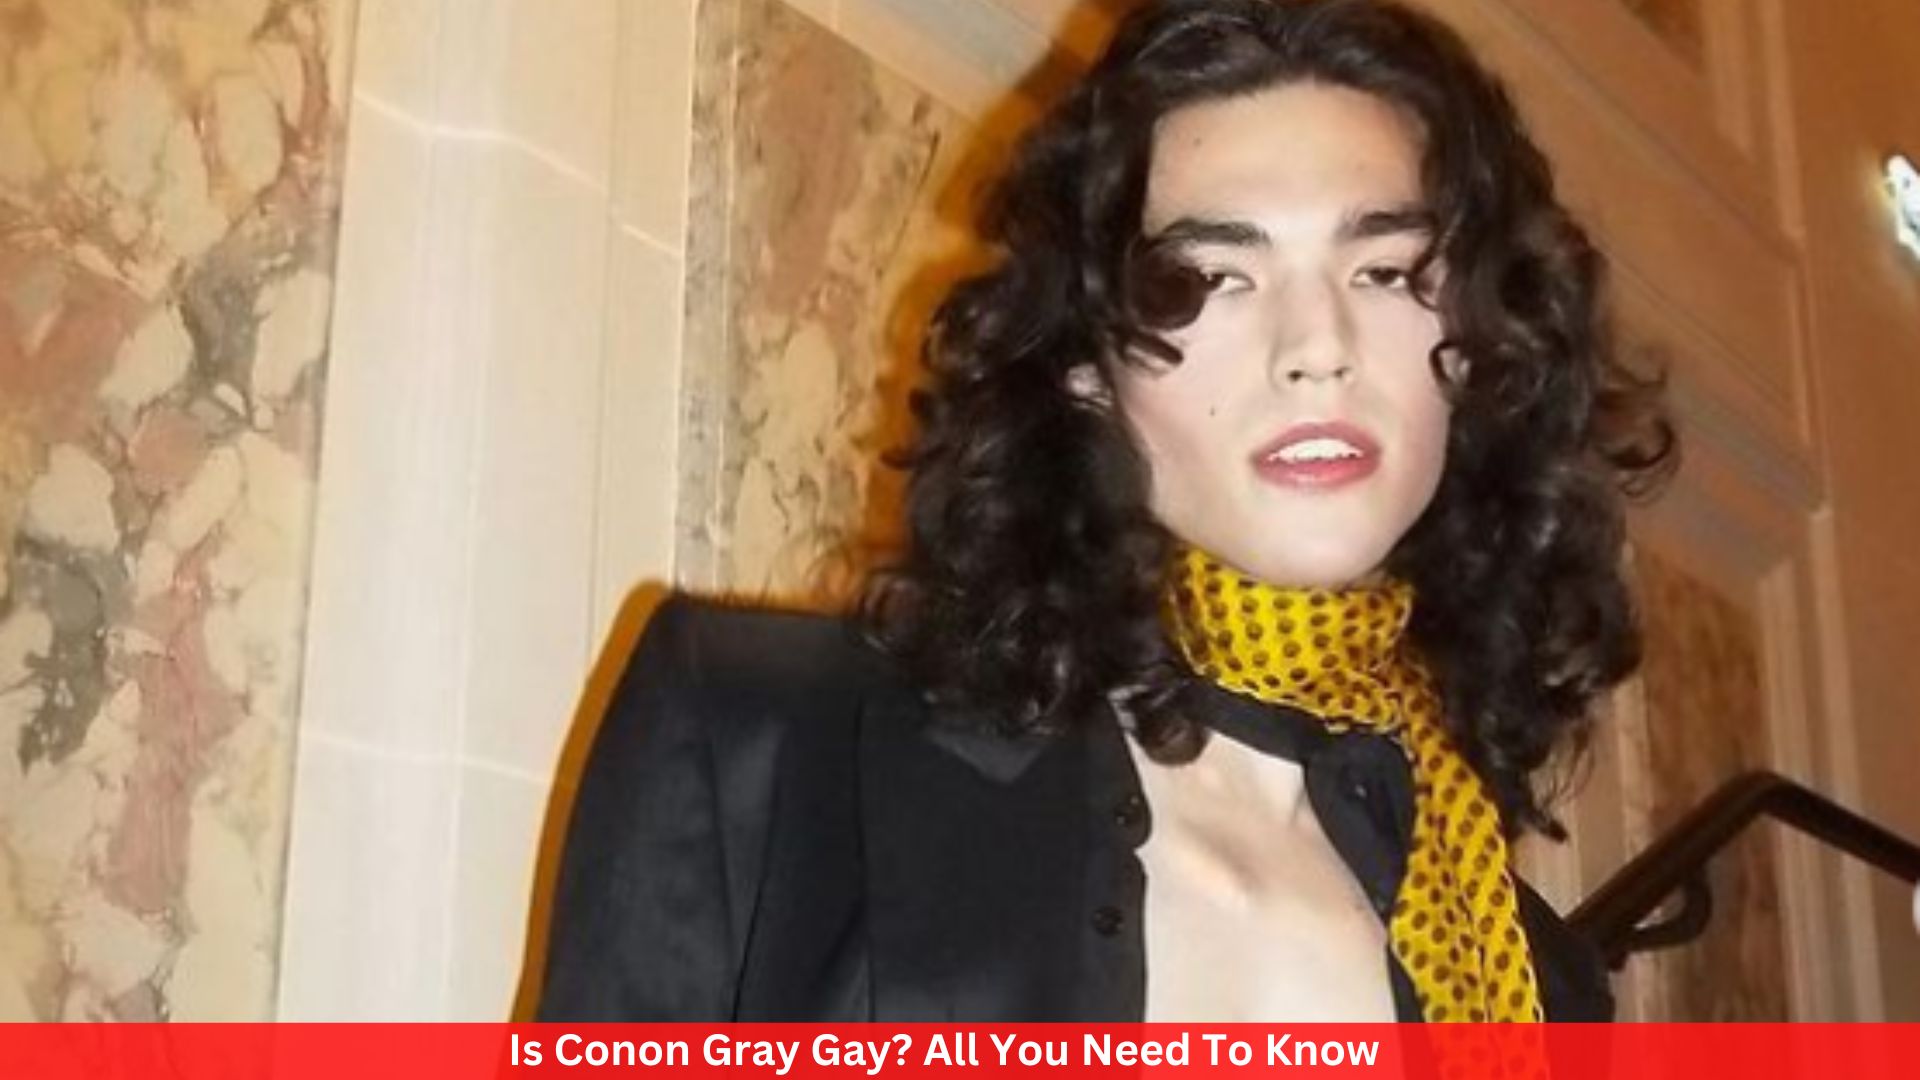 Is Conon Gray Gay? All You Need To Know